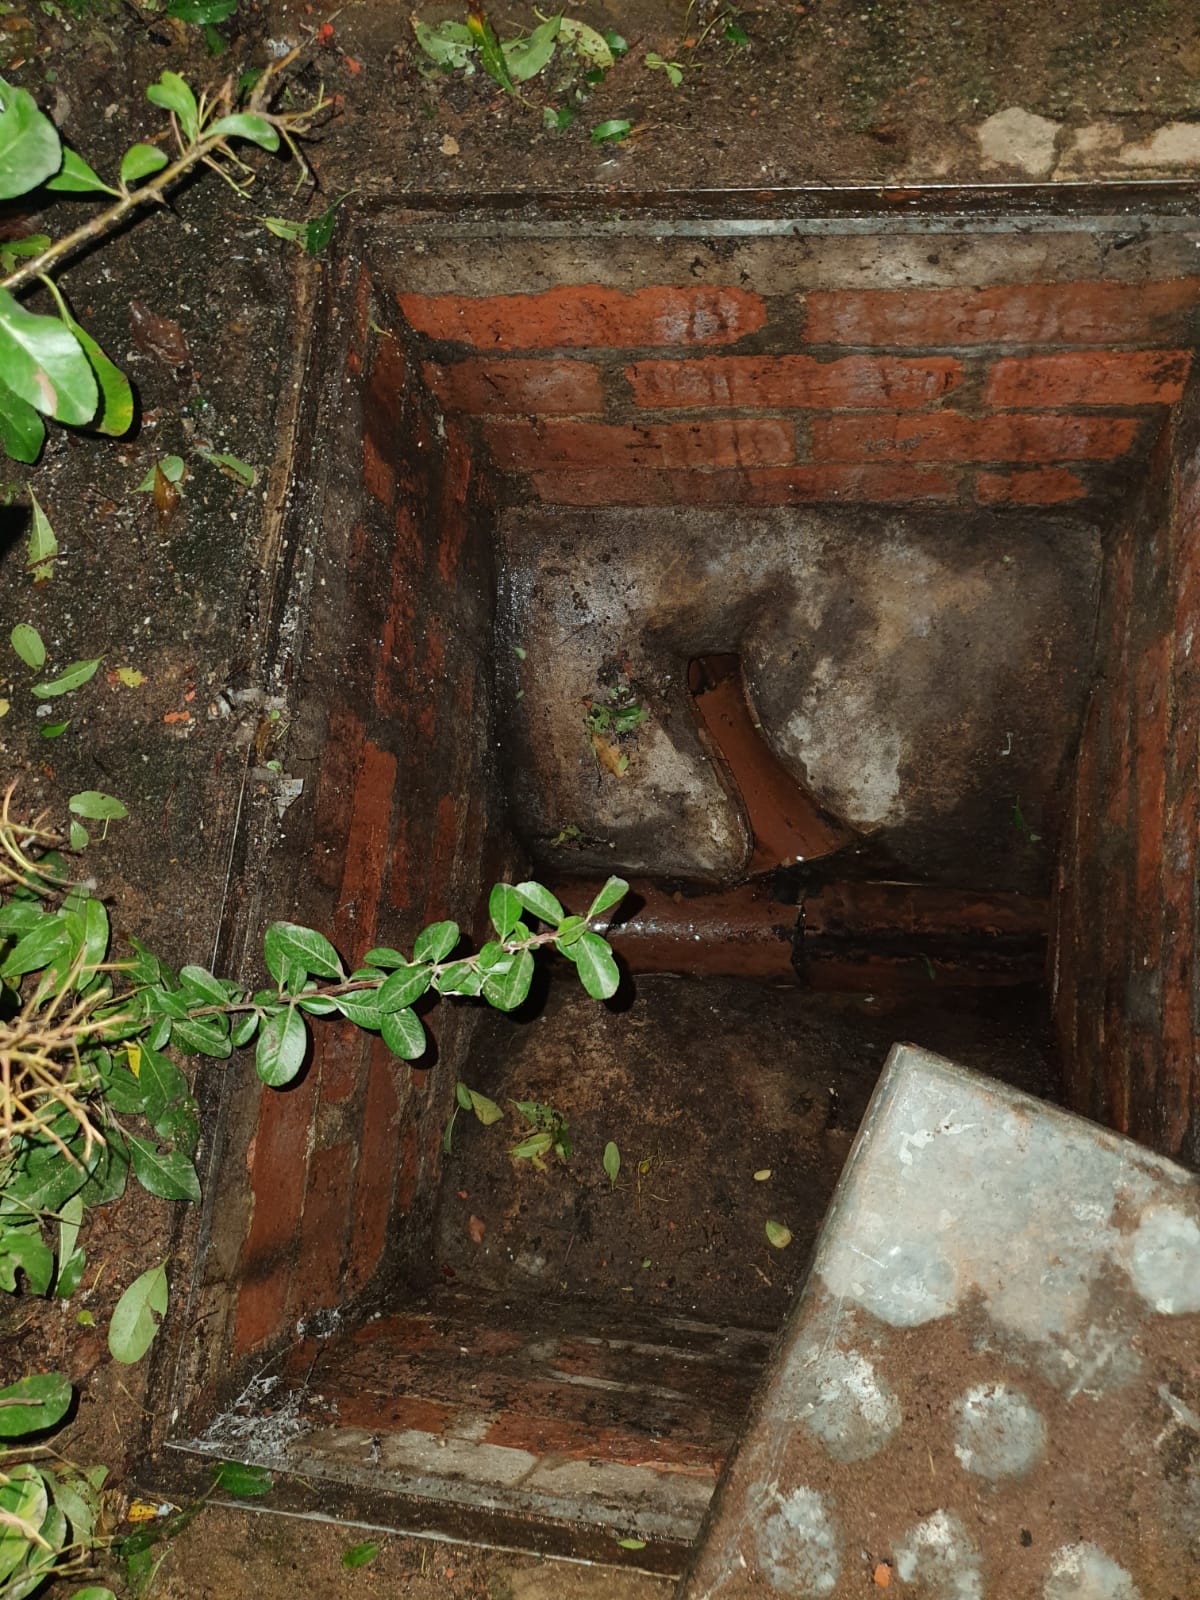 How to avoid smelly drains in your property?